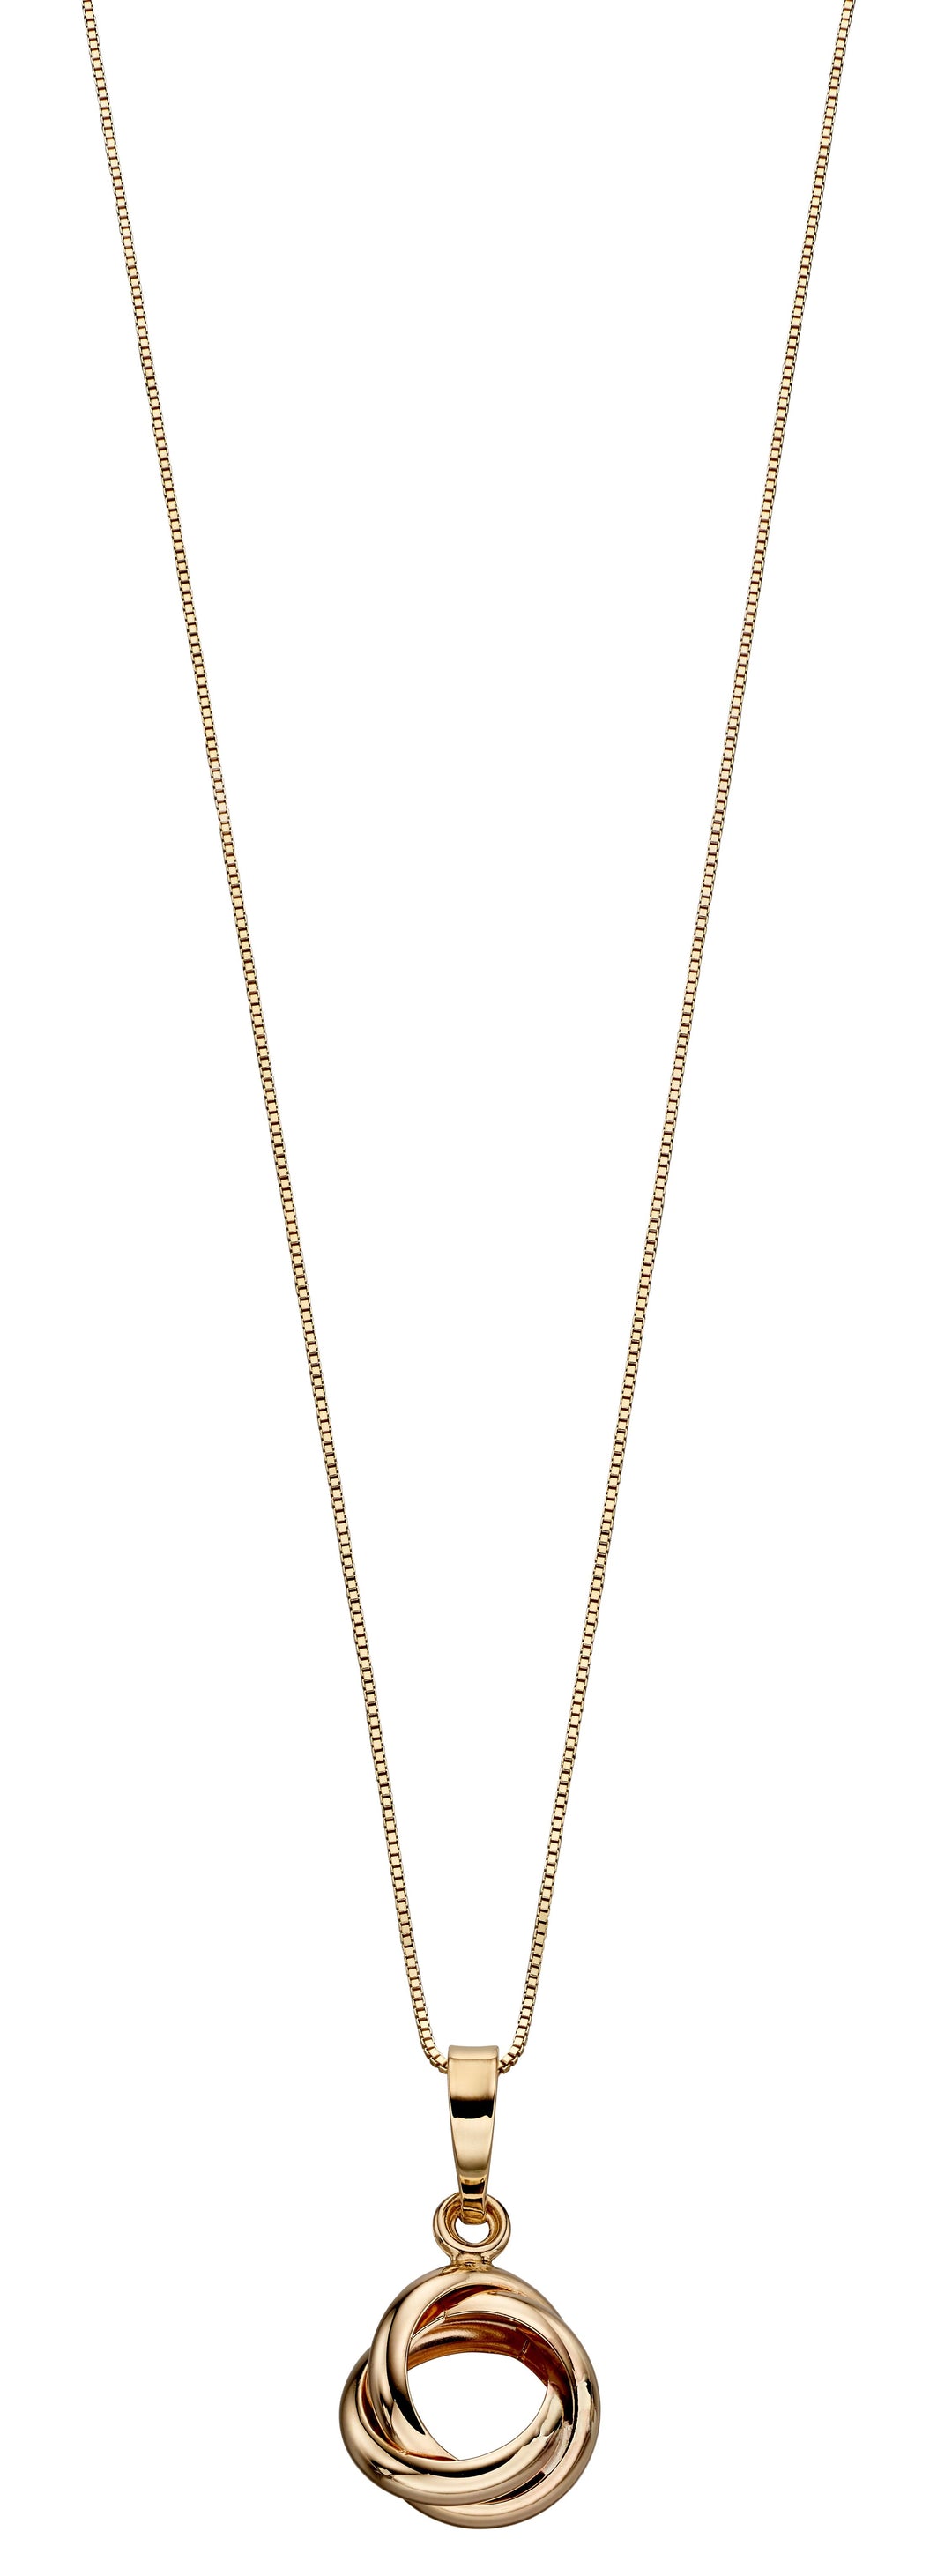 Penmans |  9ct Yellow Gold Twist Open Knot Necklace